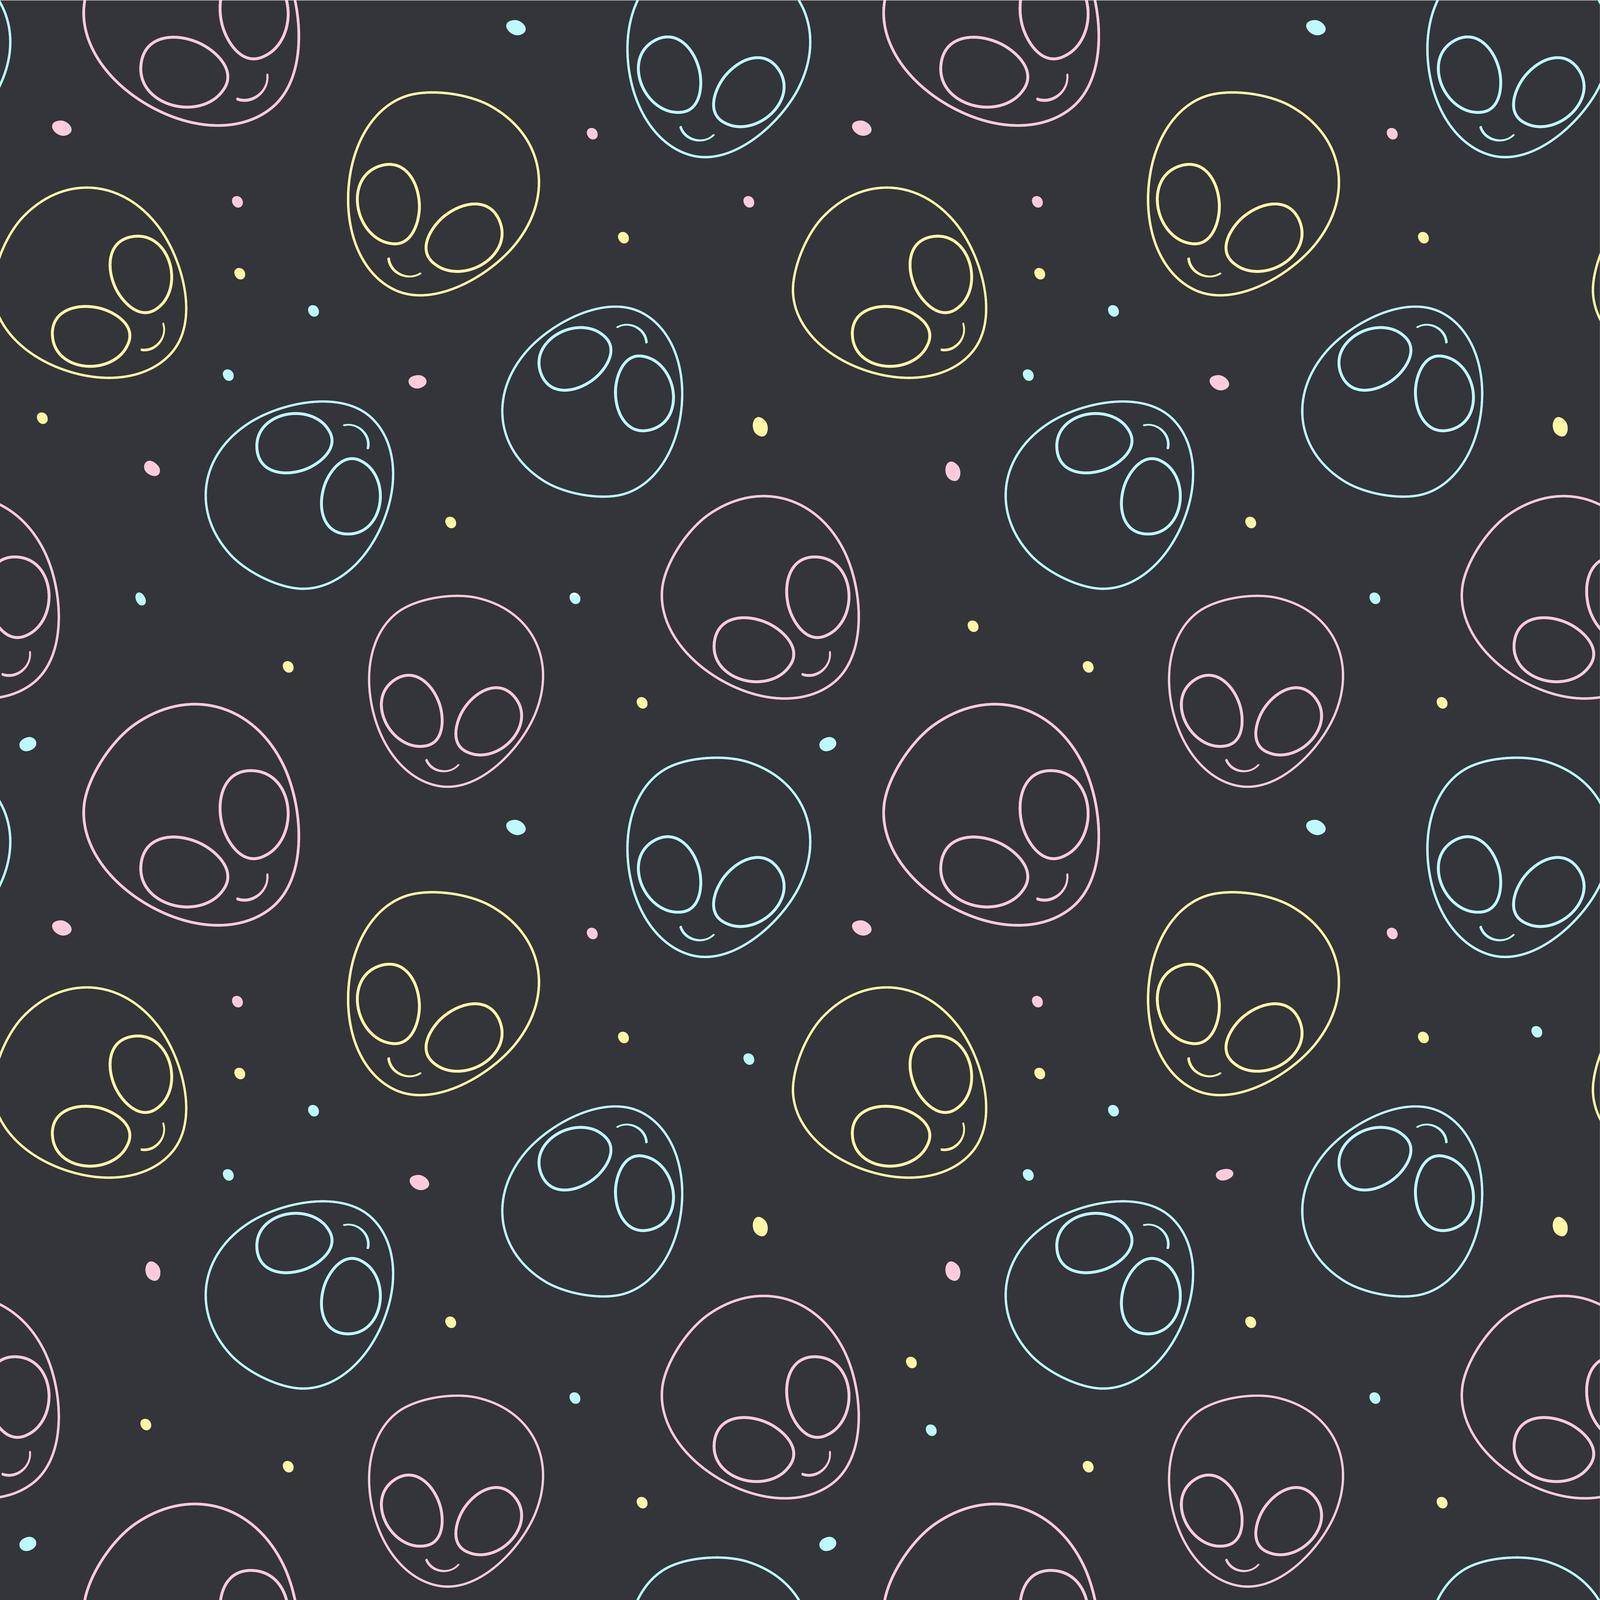 Pastel blue, pink, and yellow alien head outlines scattered on a dark gray background with stars. Seamless repeating vector illustration background.